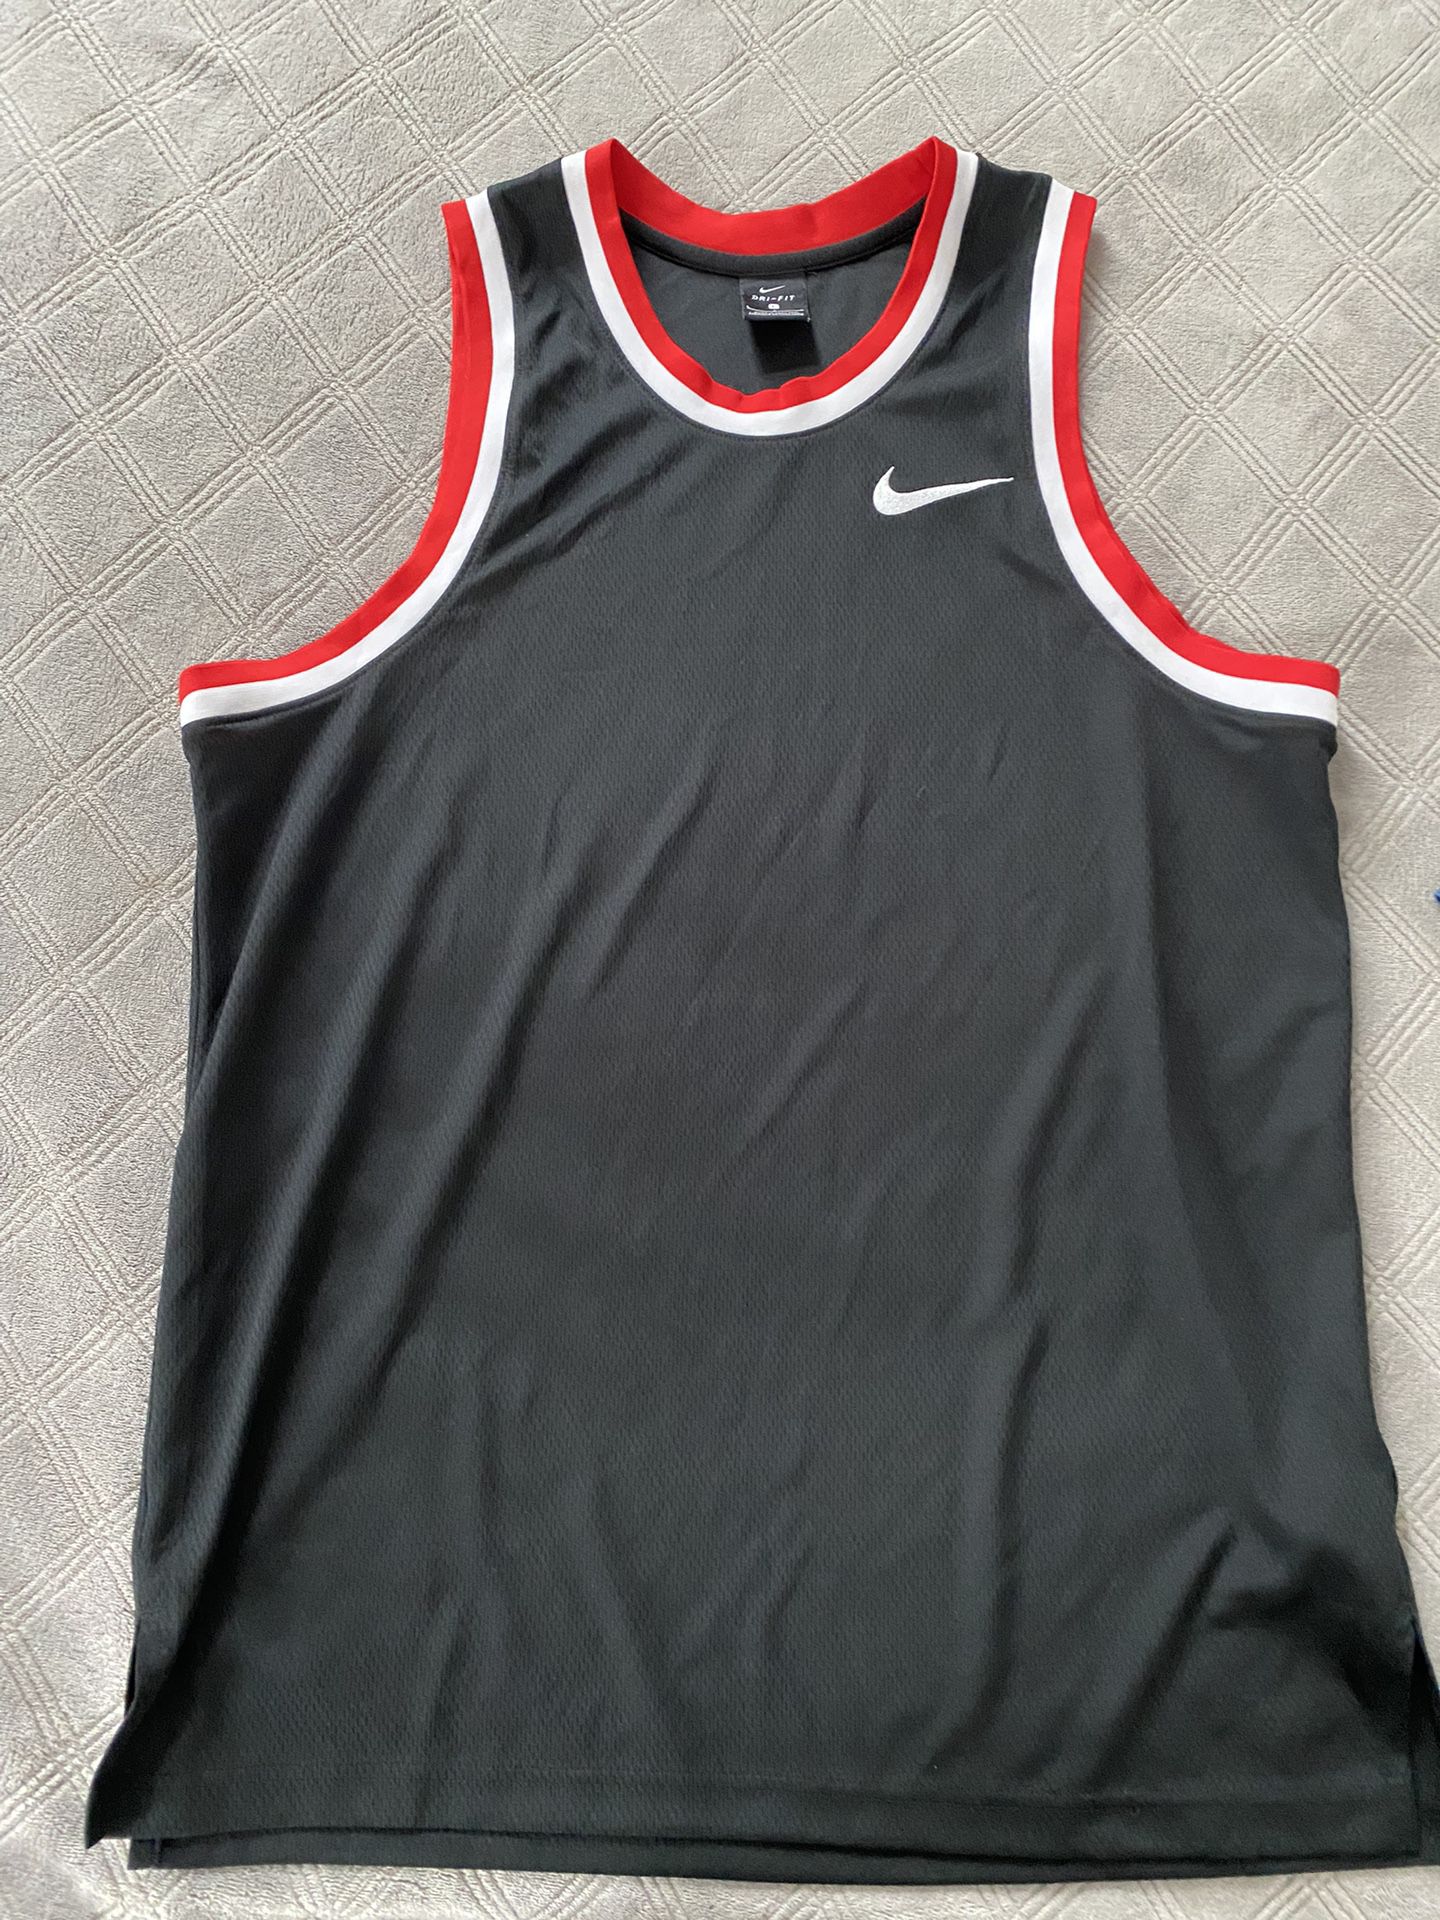 NBA Authentic Jersey for Sale in The Bronx, NY - OfferUp